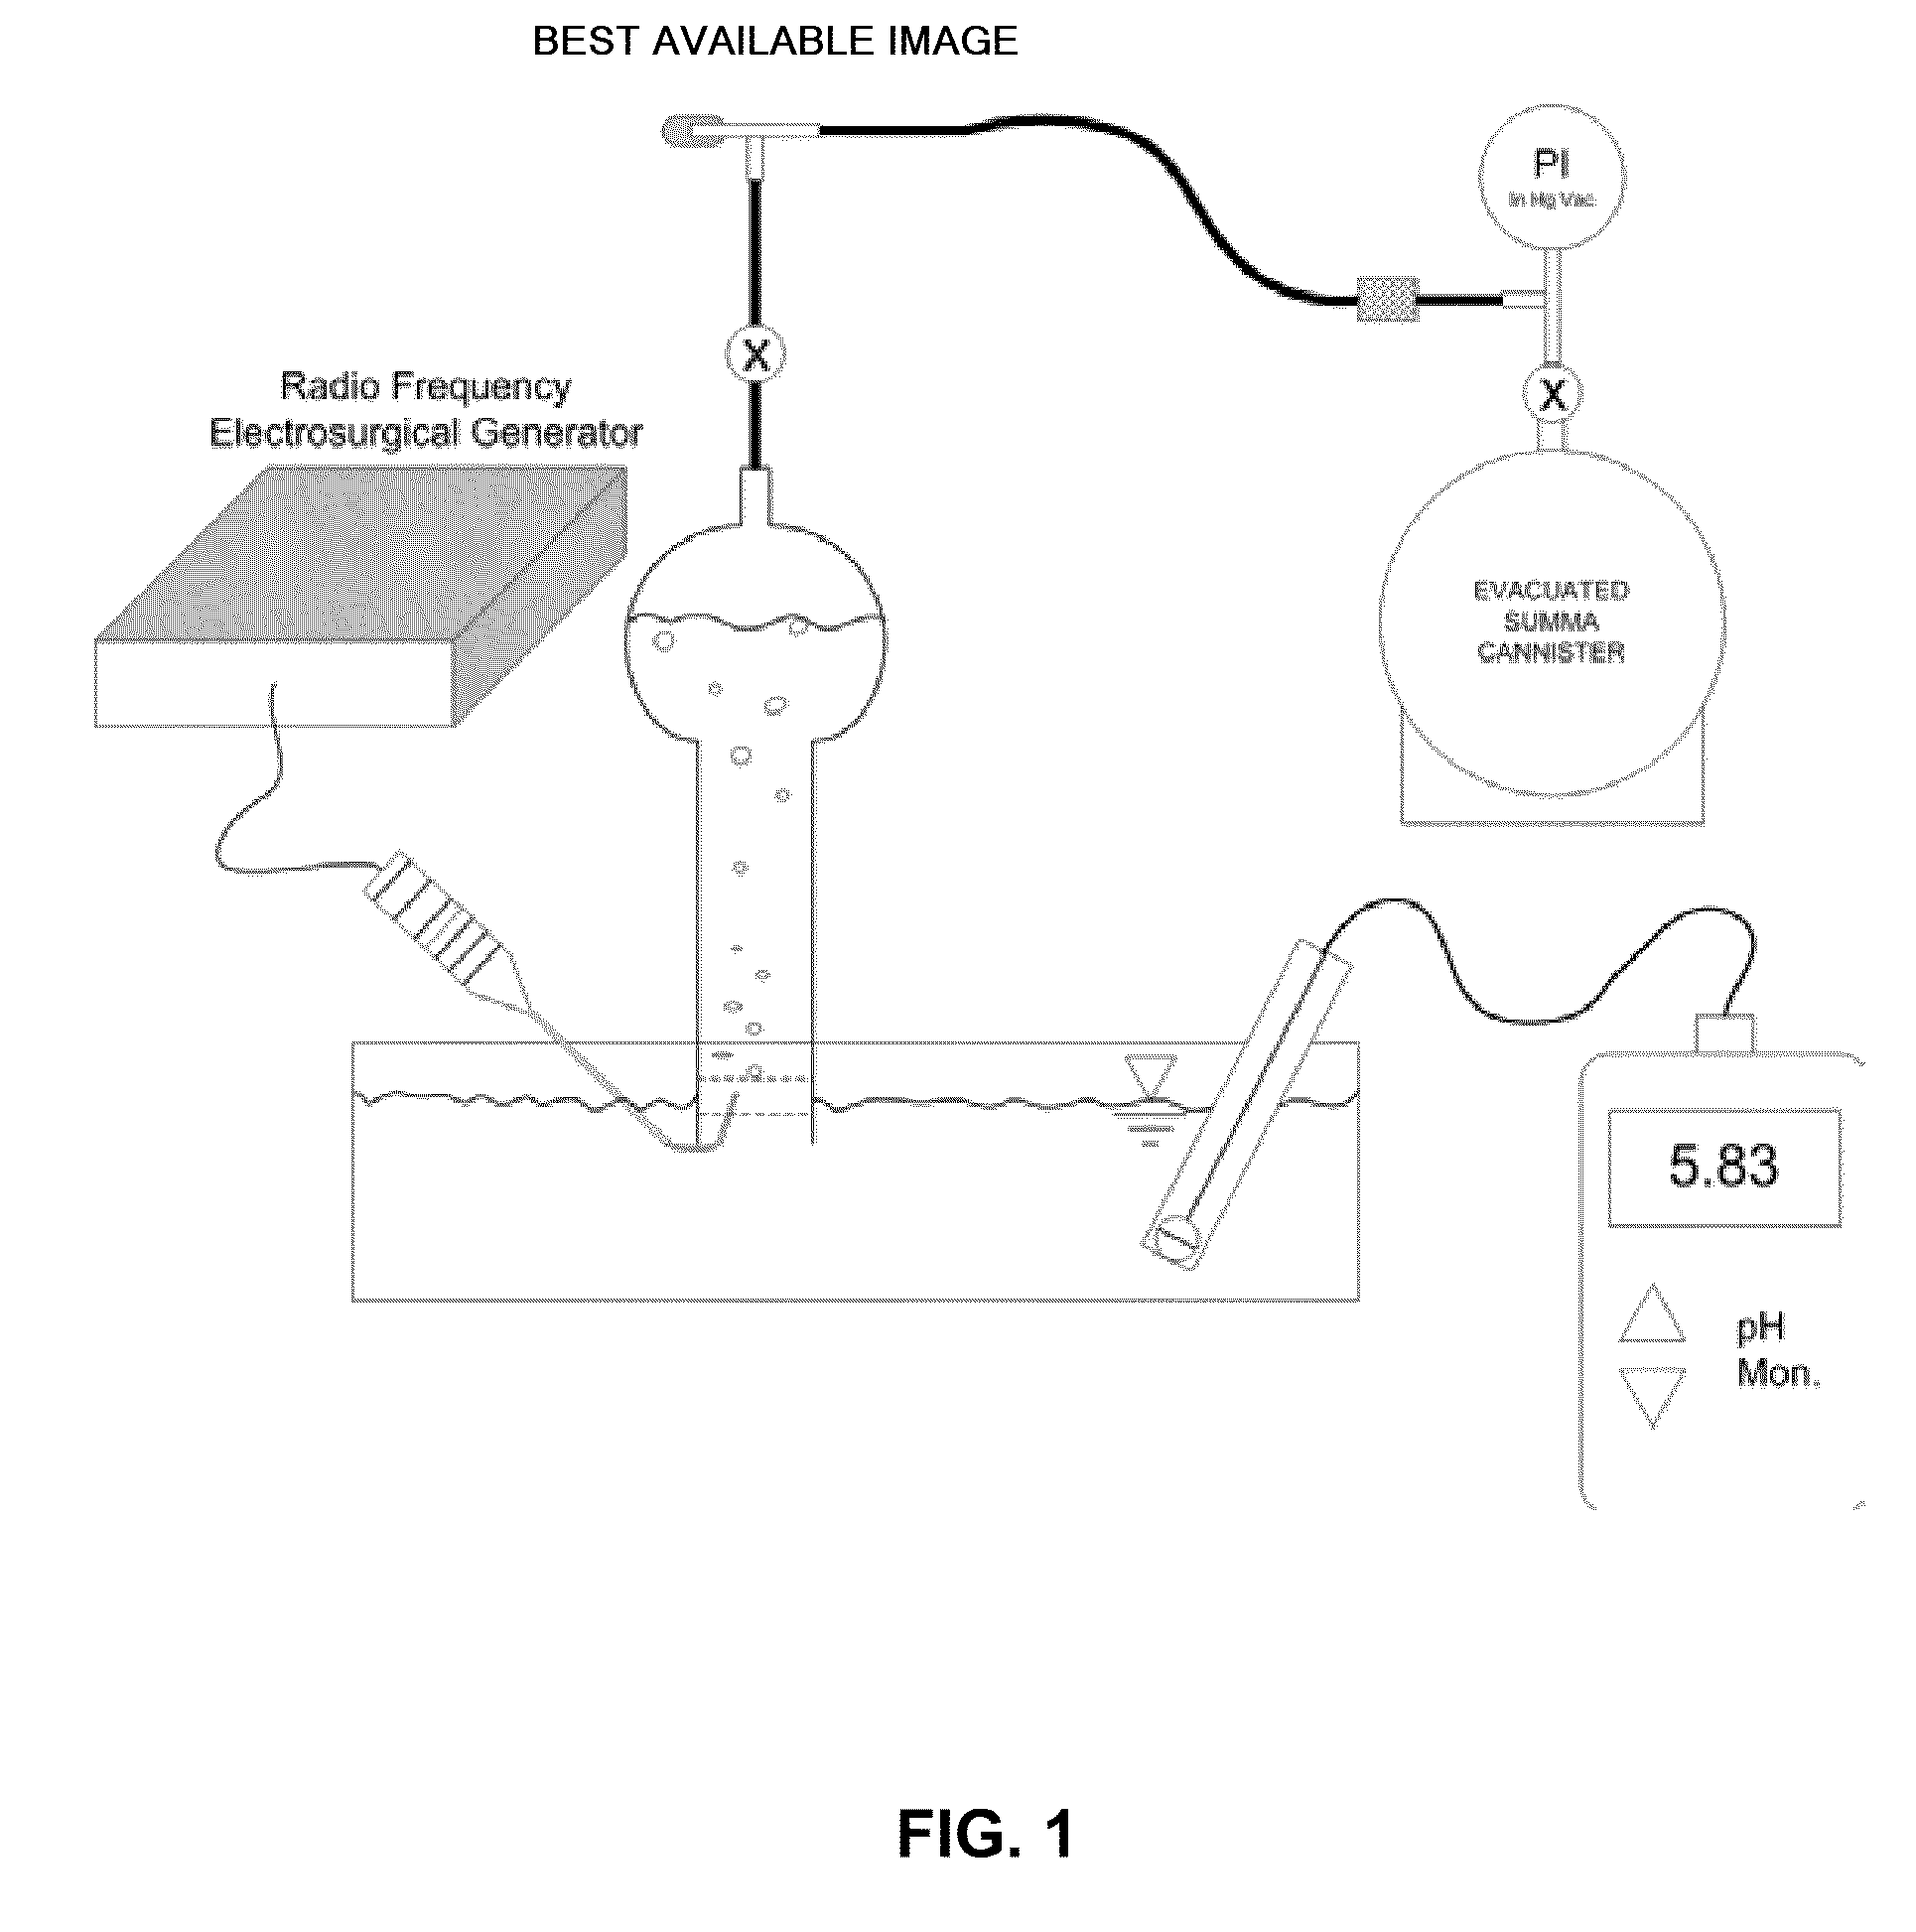 Interfacing Media Manipulation with Non-Ablation Radiofrequency Energy System and Method